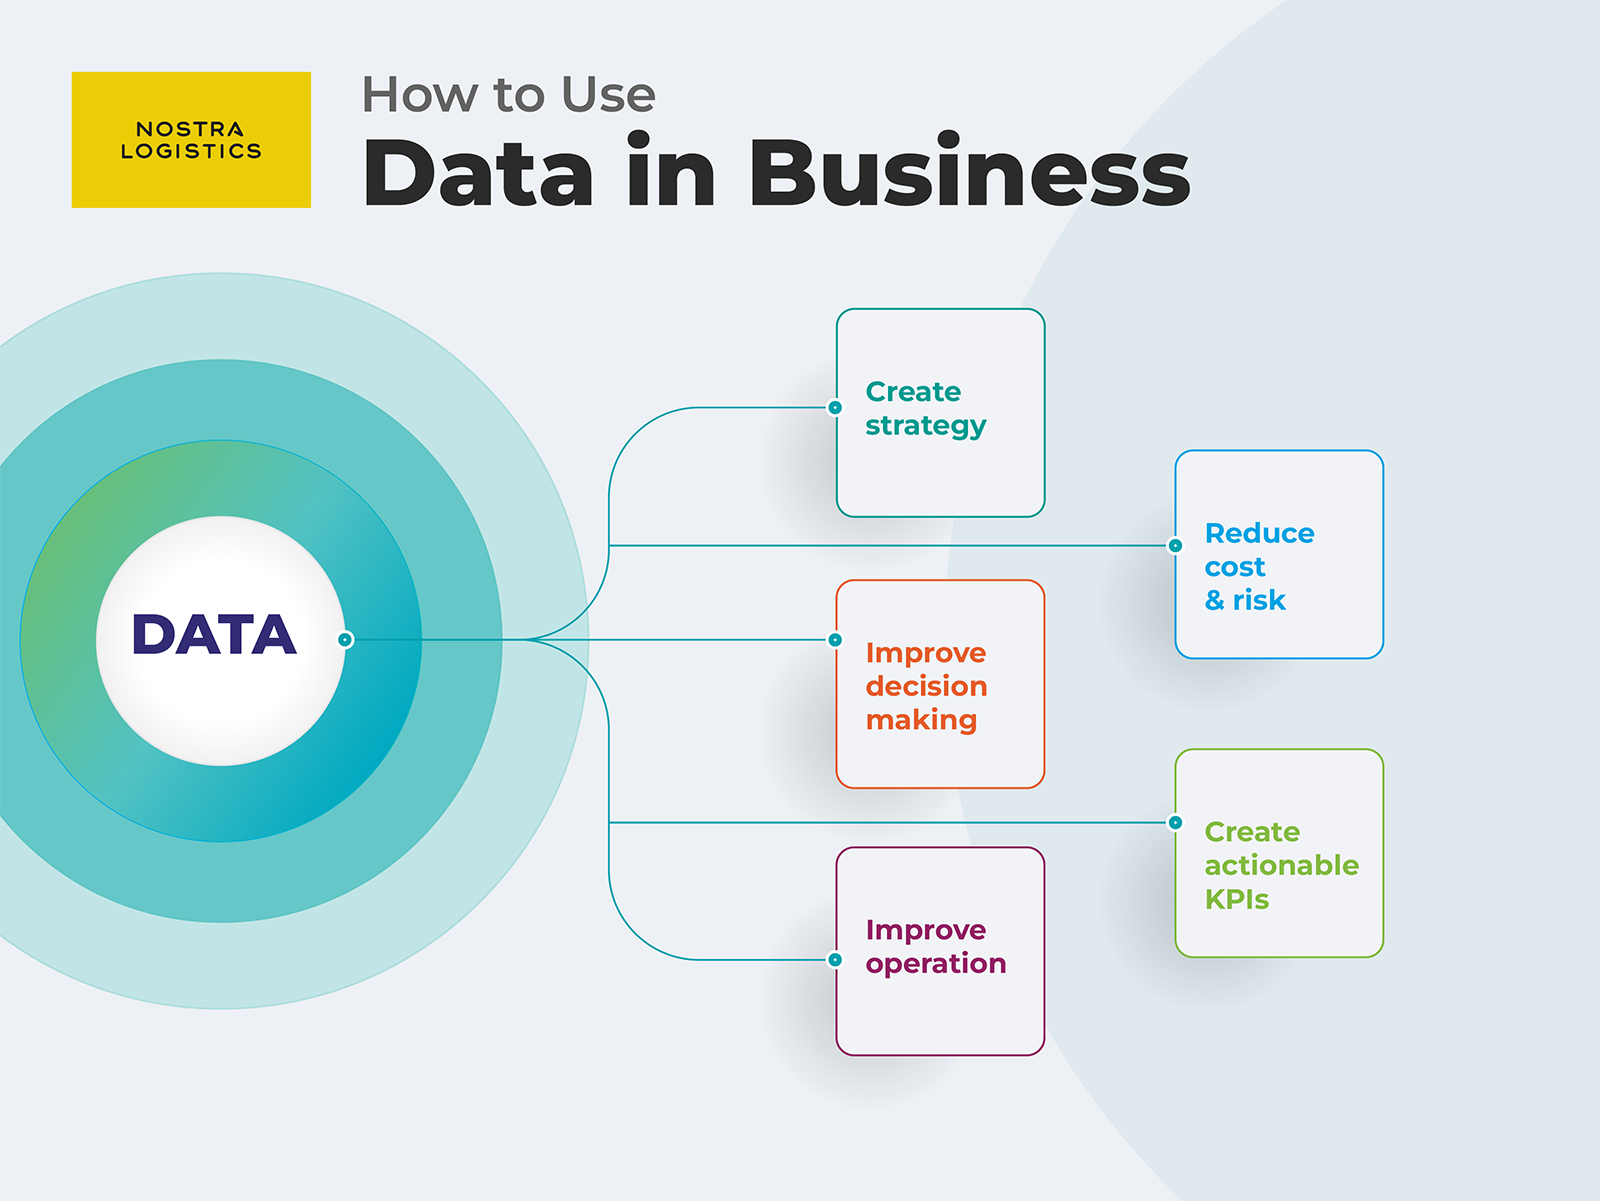 How to Use Data in Business